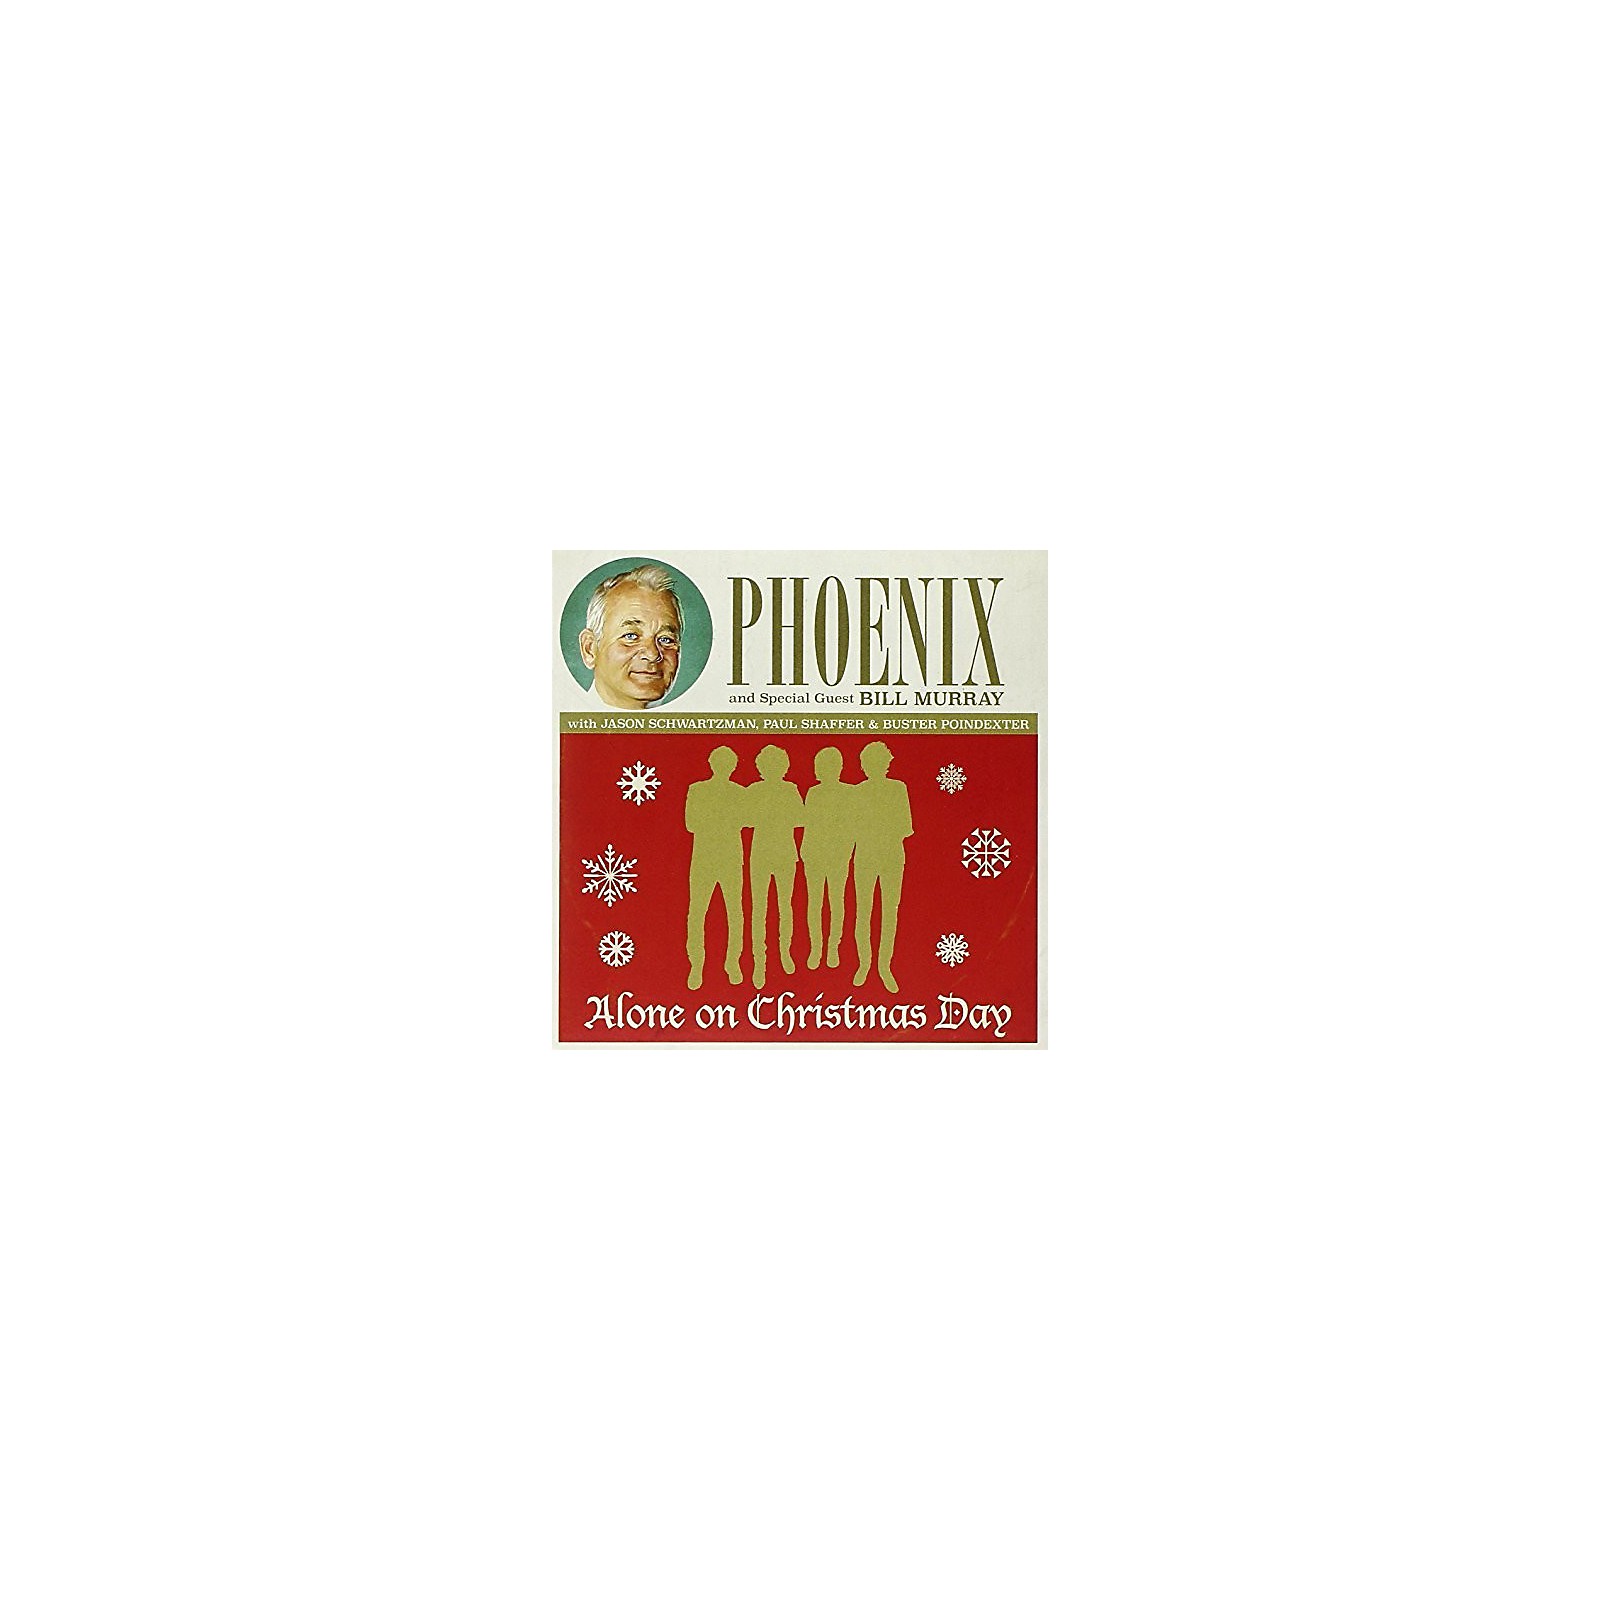 The Phoenix - Alone on Christmas Day | Musician's Friend